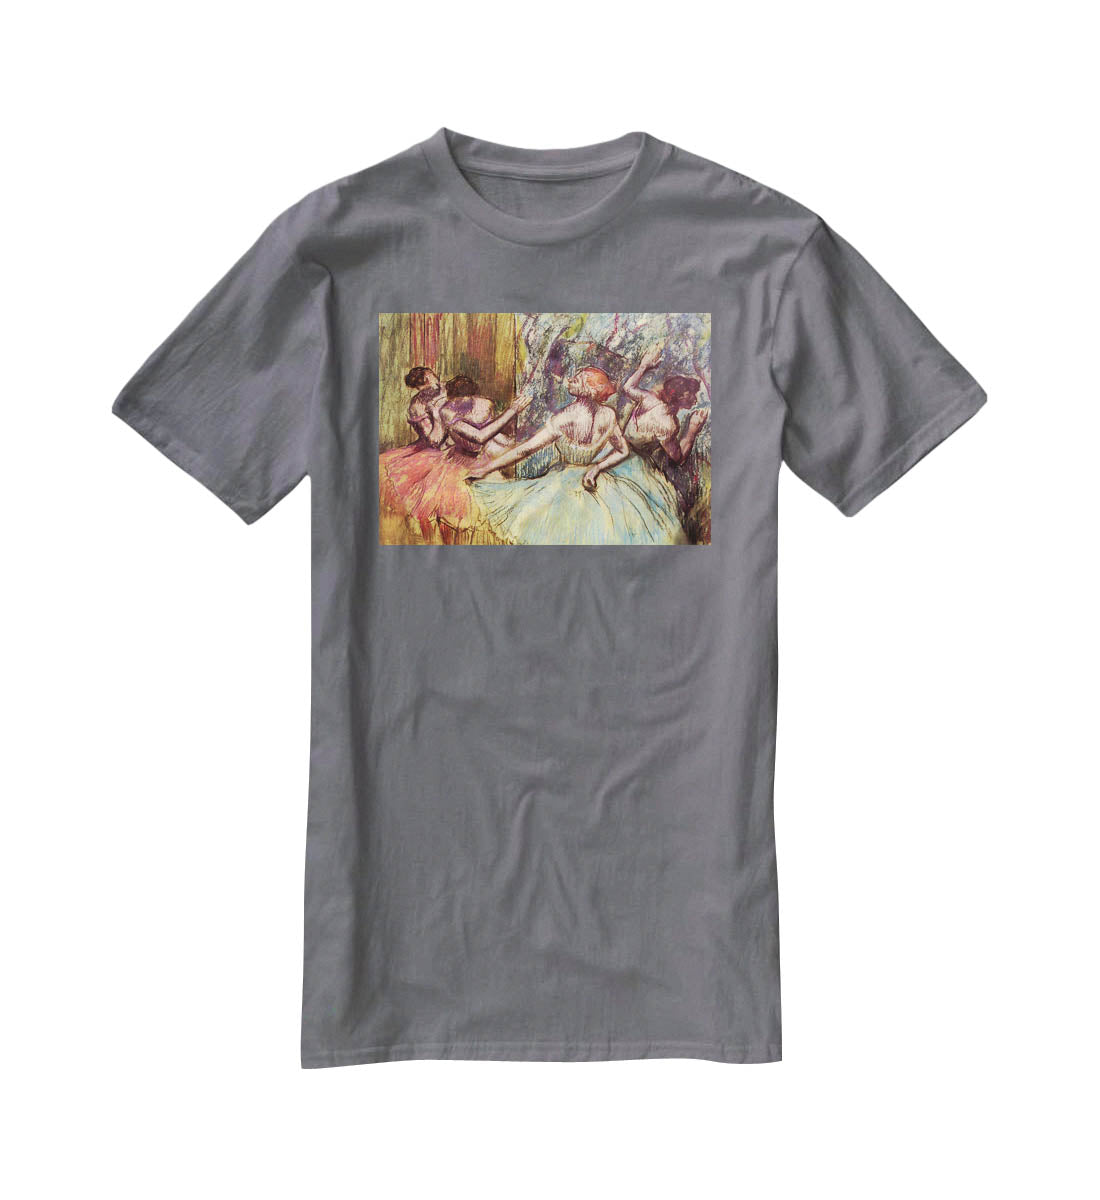 Four dancers behind the scenes 2 by Degas T-Shirt - Canvas Art Rocks - 3